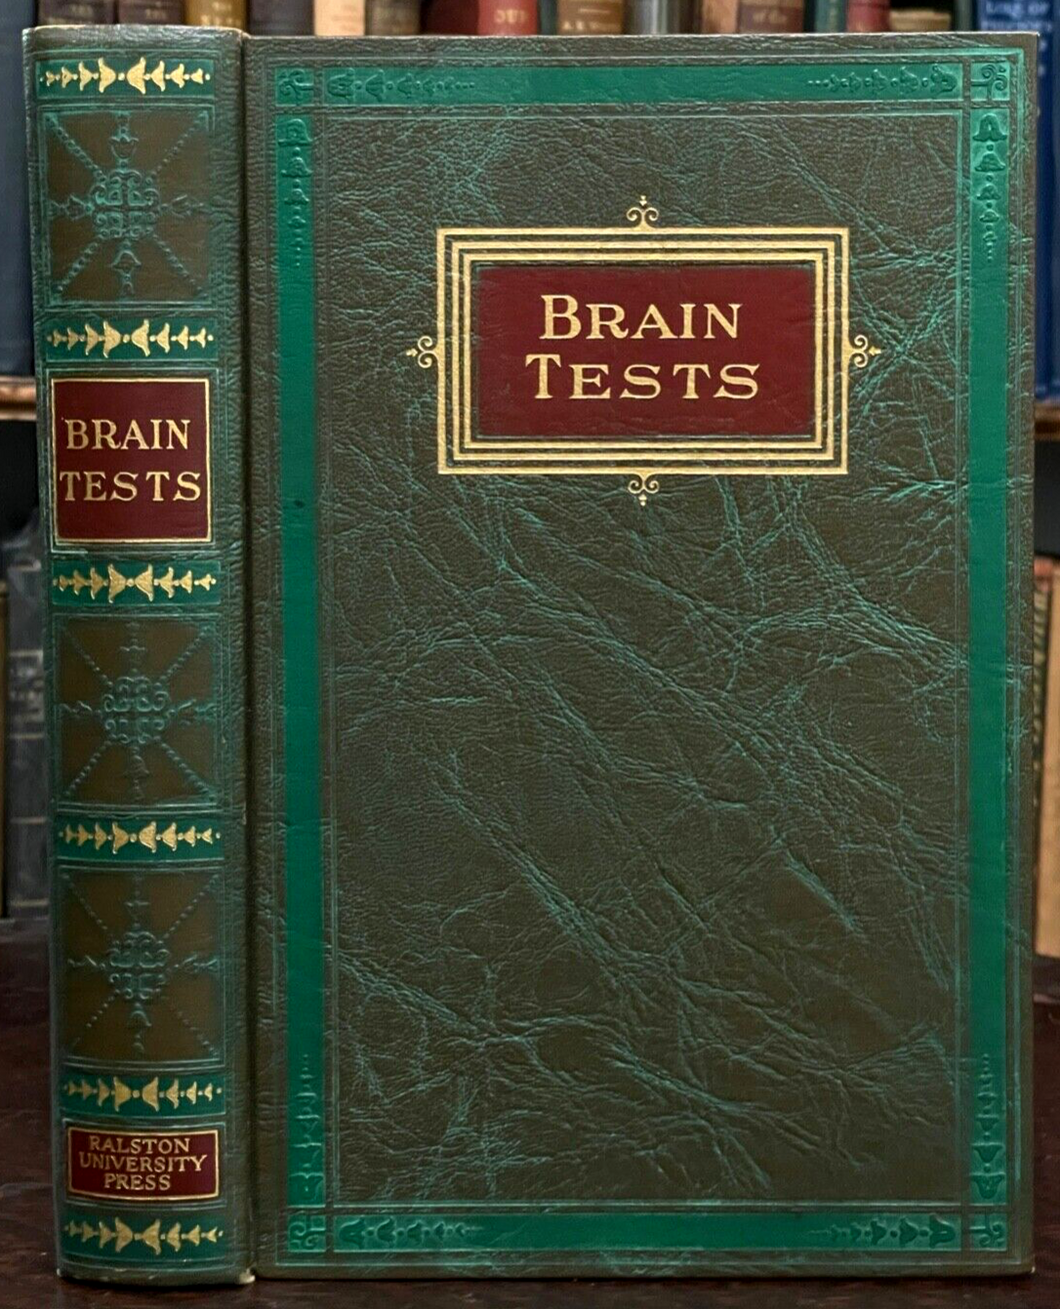 BRAIN TESTS - Shaftesbury, 1928 MENTAL CAPACITY LEARNING THOUGHT RACISM EUGENICS